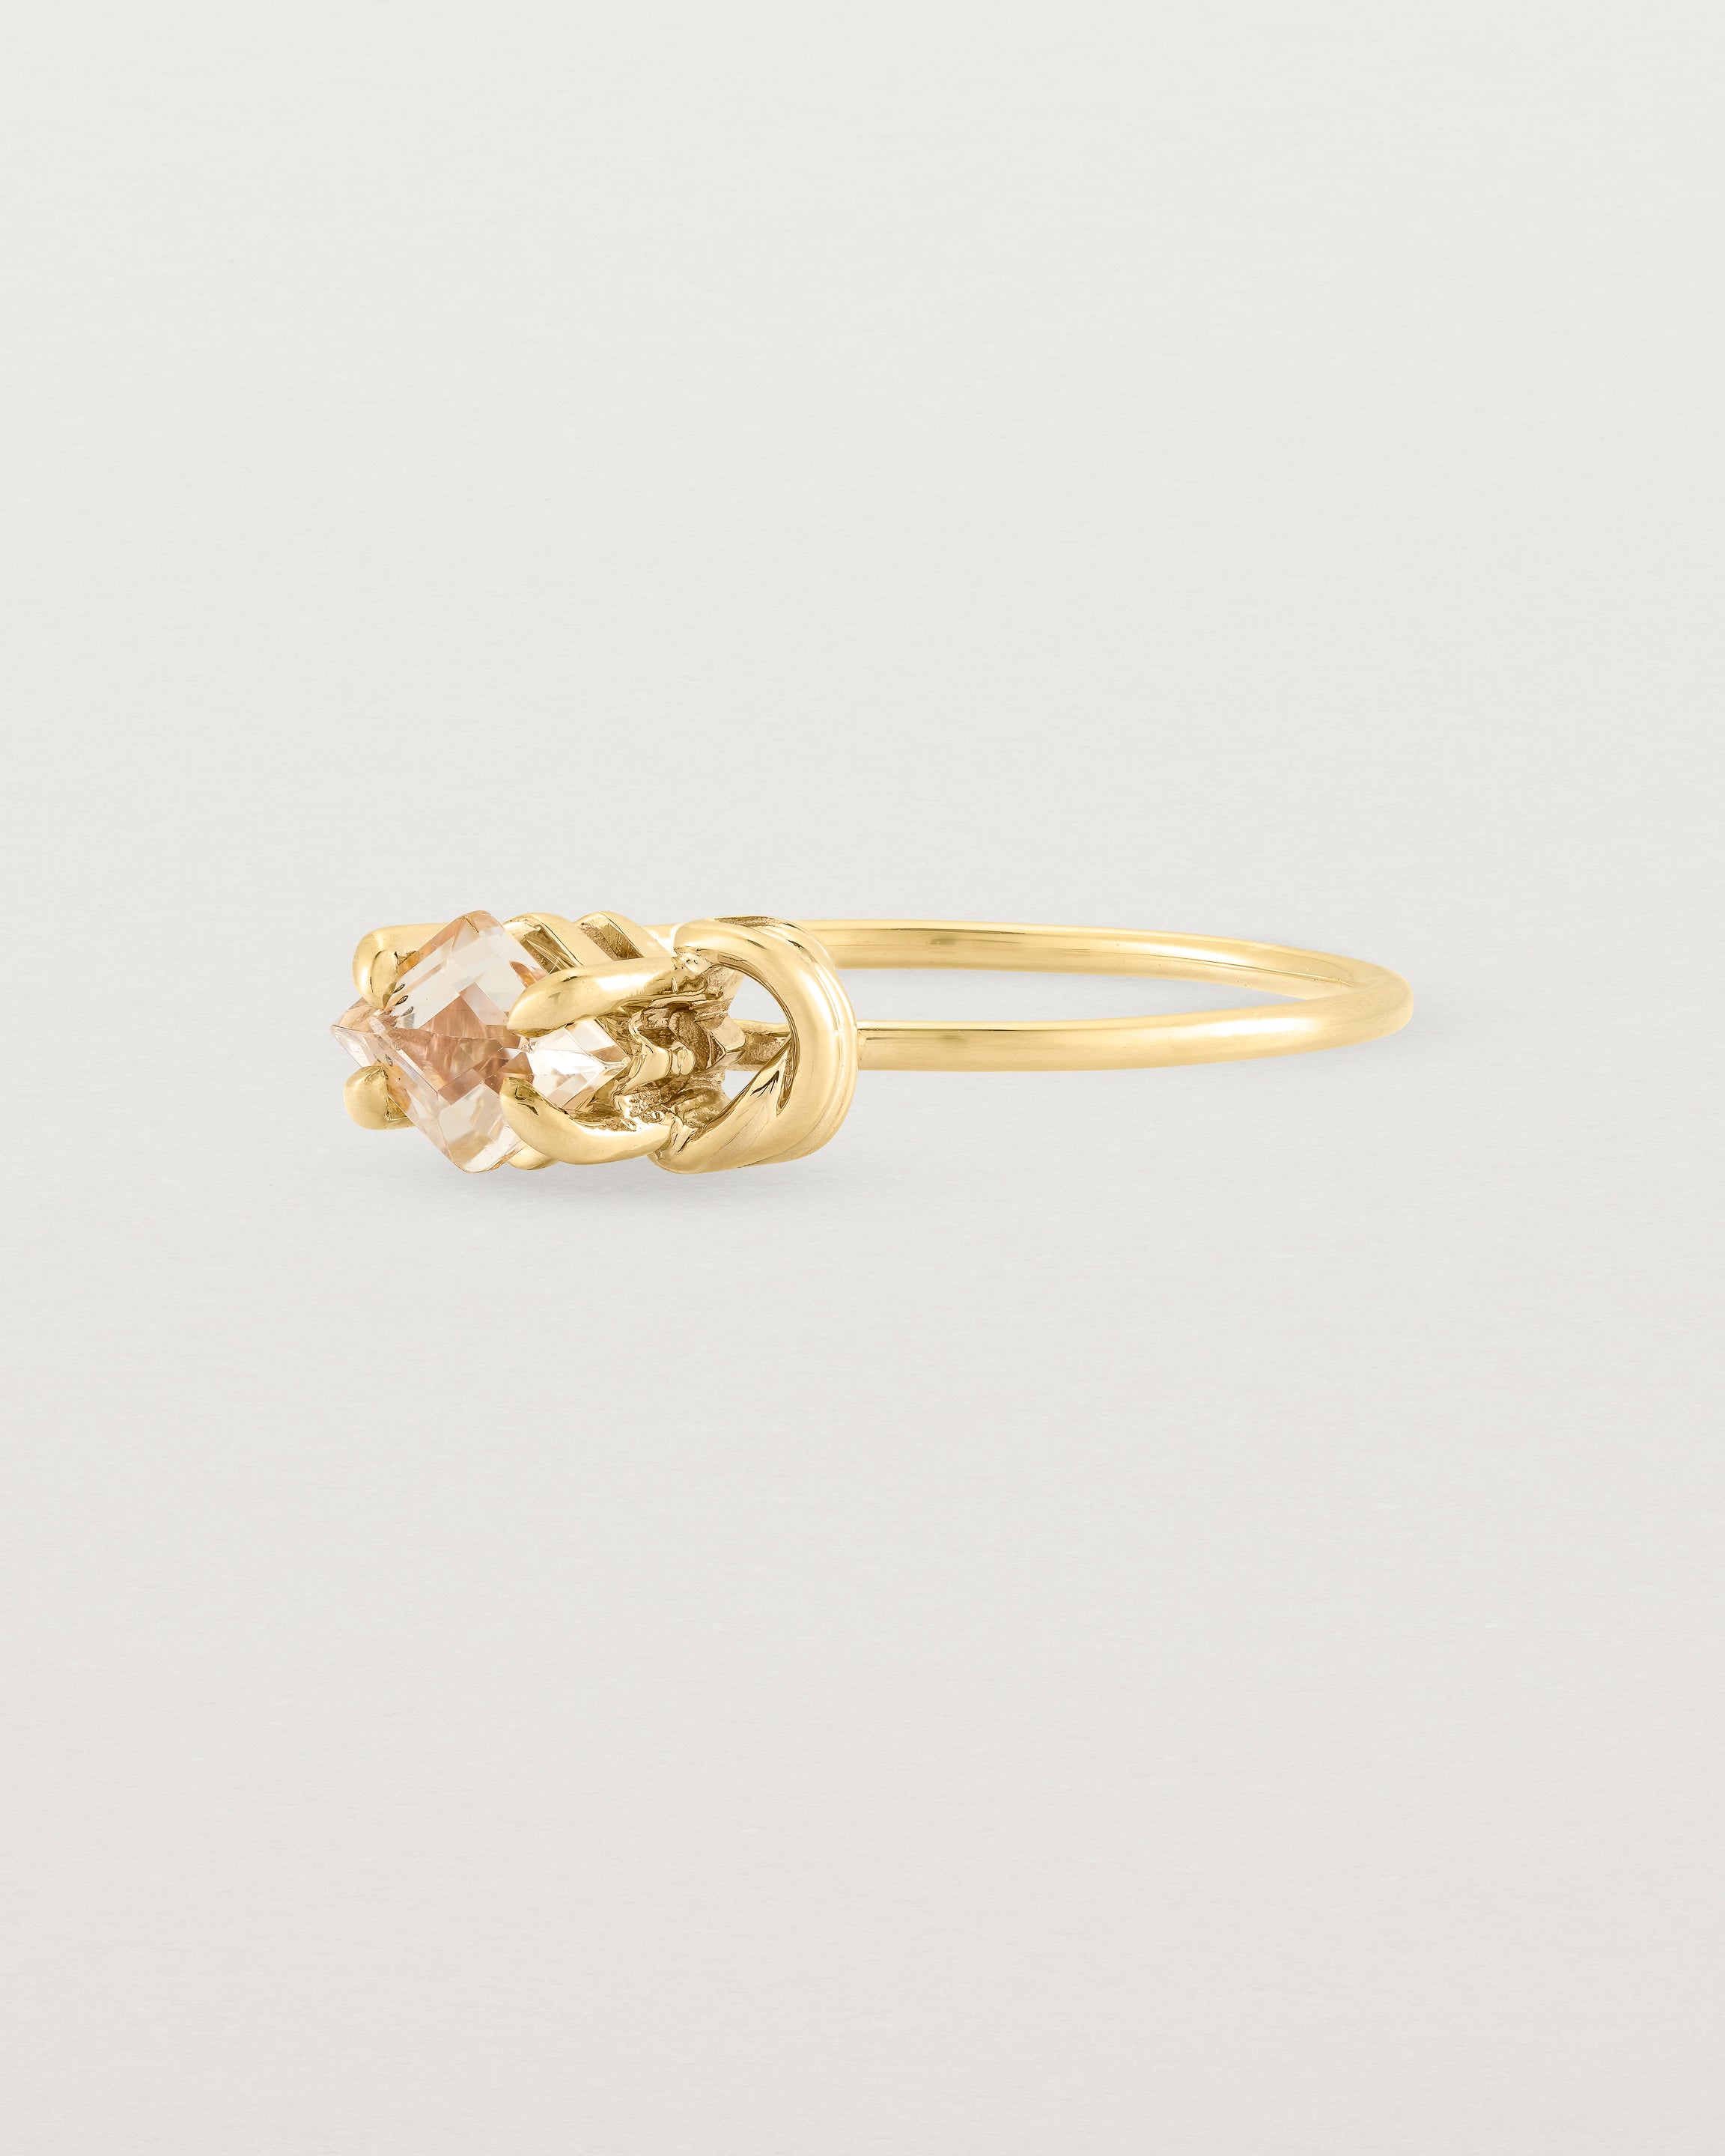 Angled view of the Nuna Ring | Savannah Sunstone in Yellow Gold.